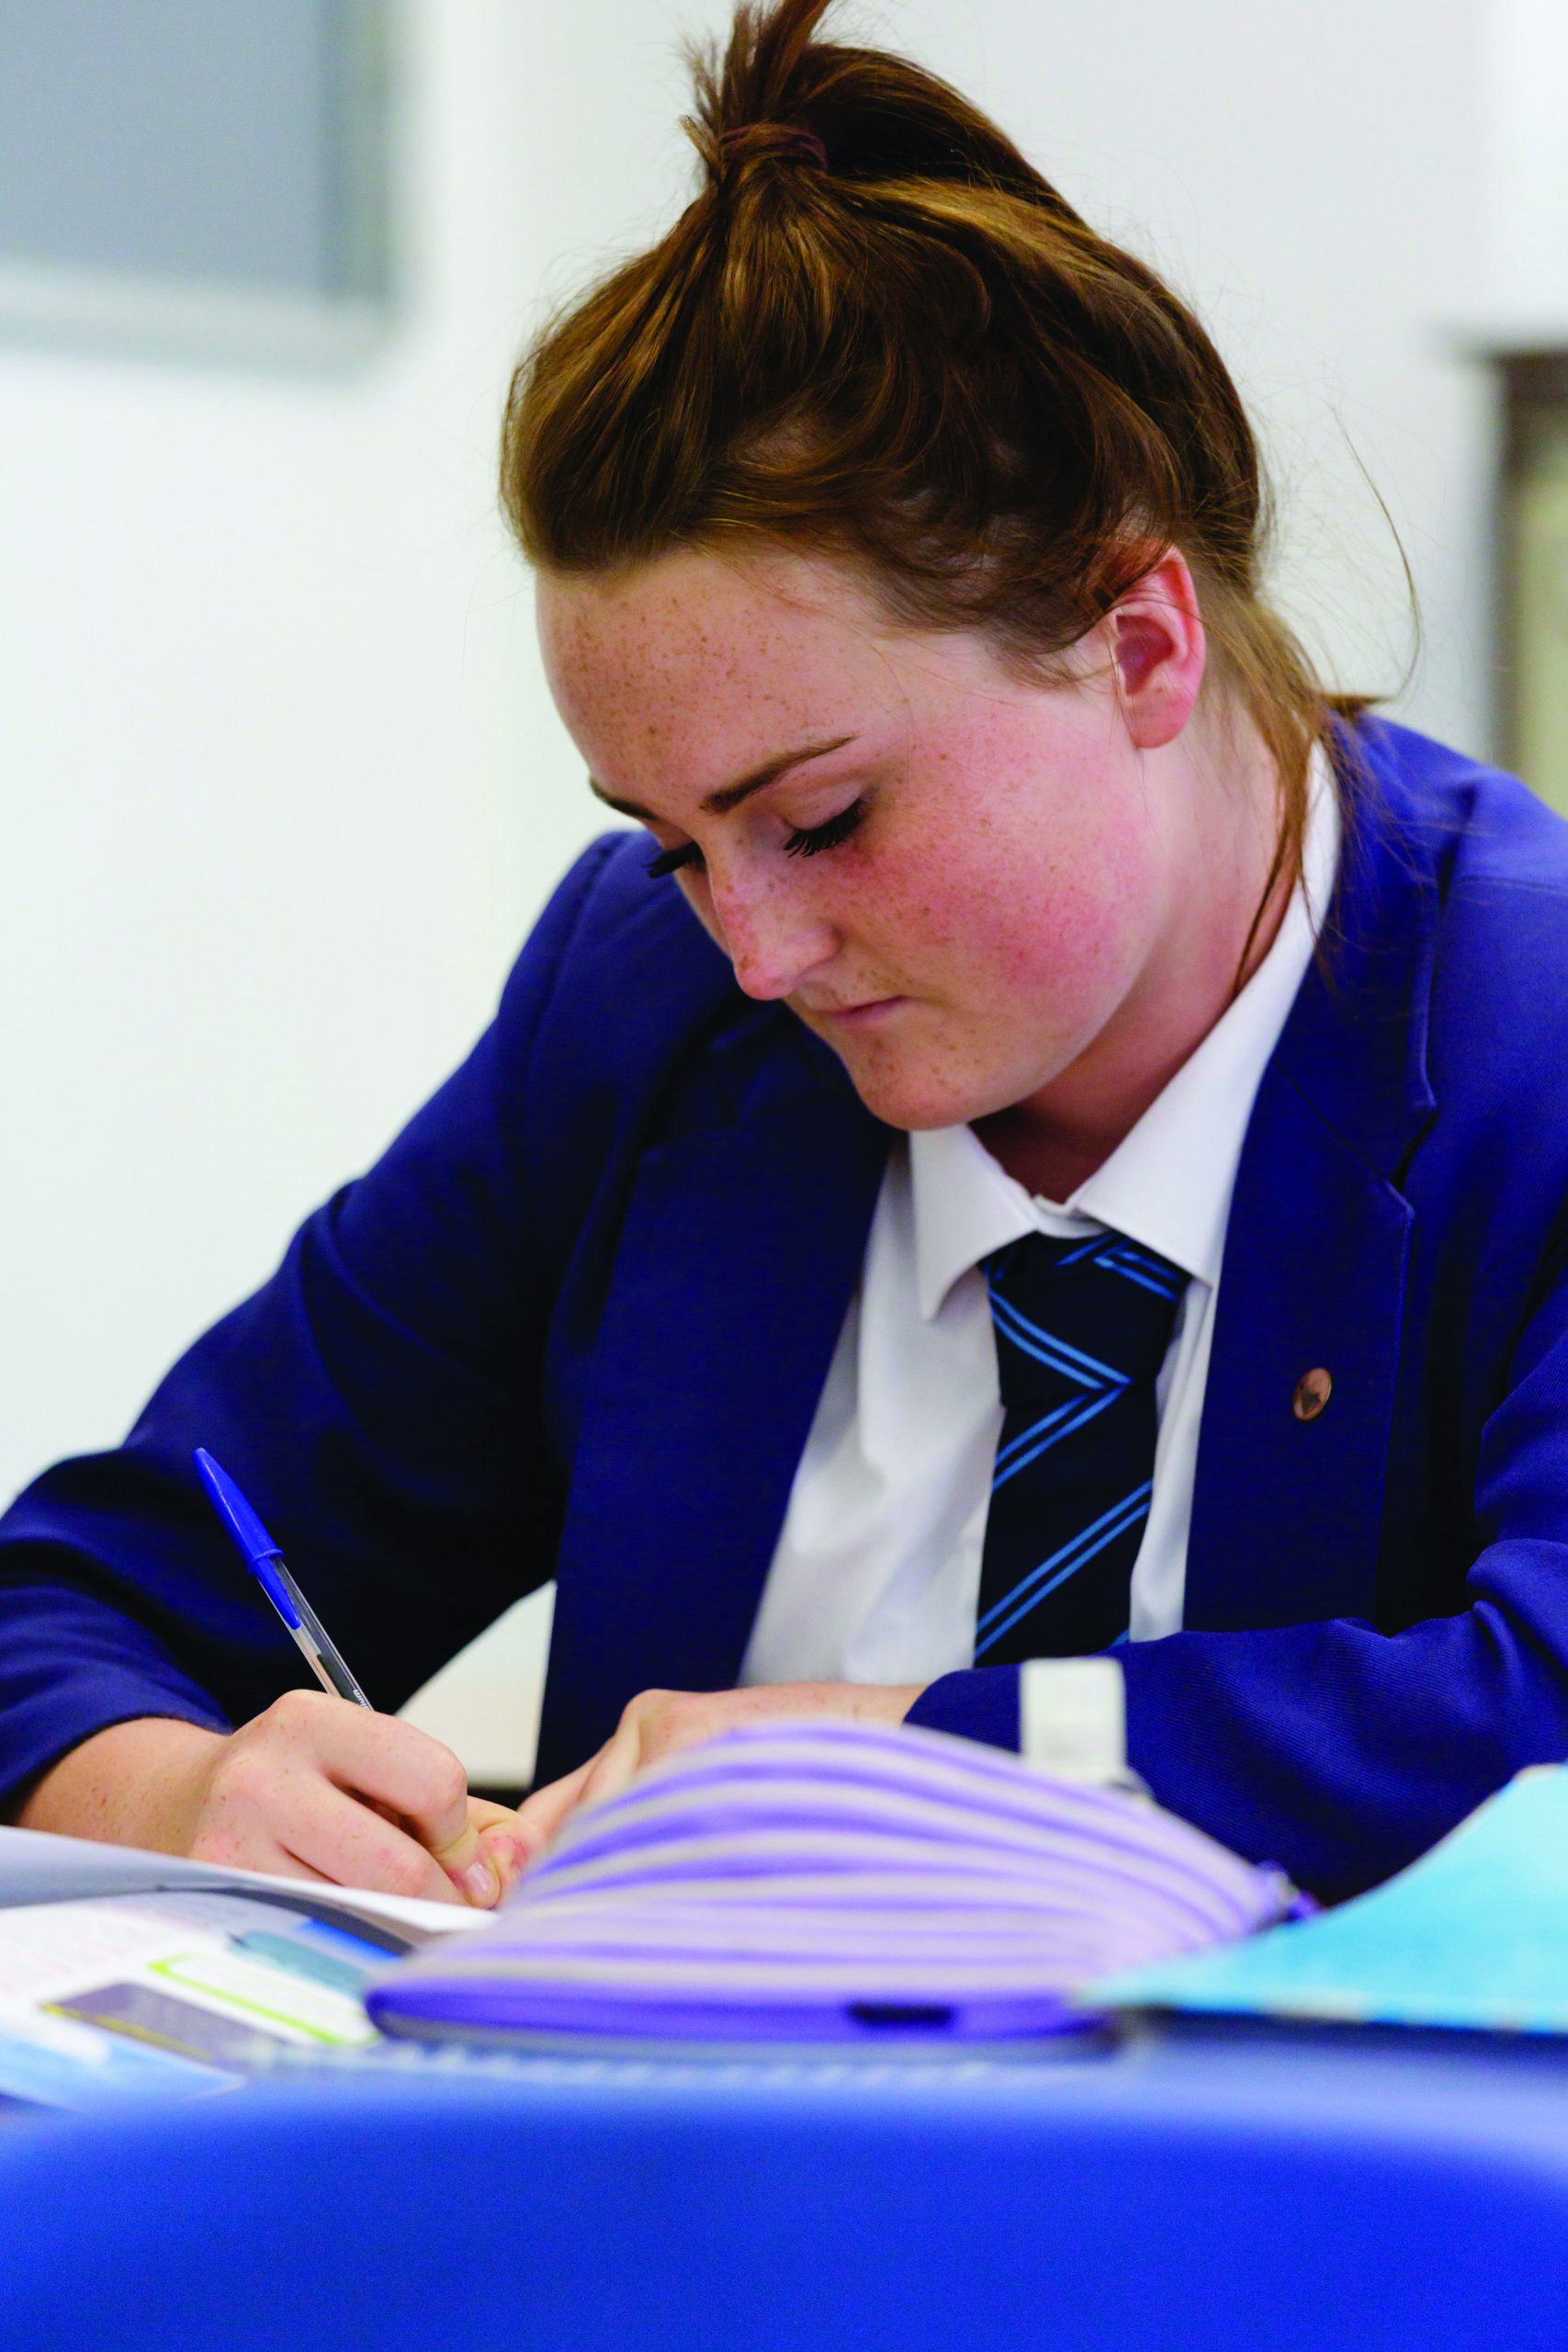 Girl in school uniform sitting at desk, looking down and writing with blue pen